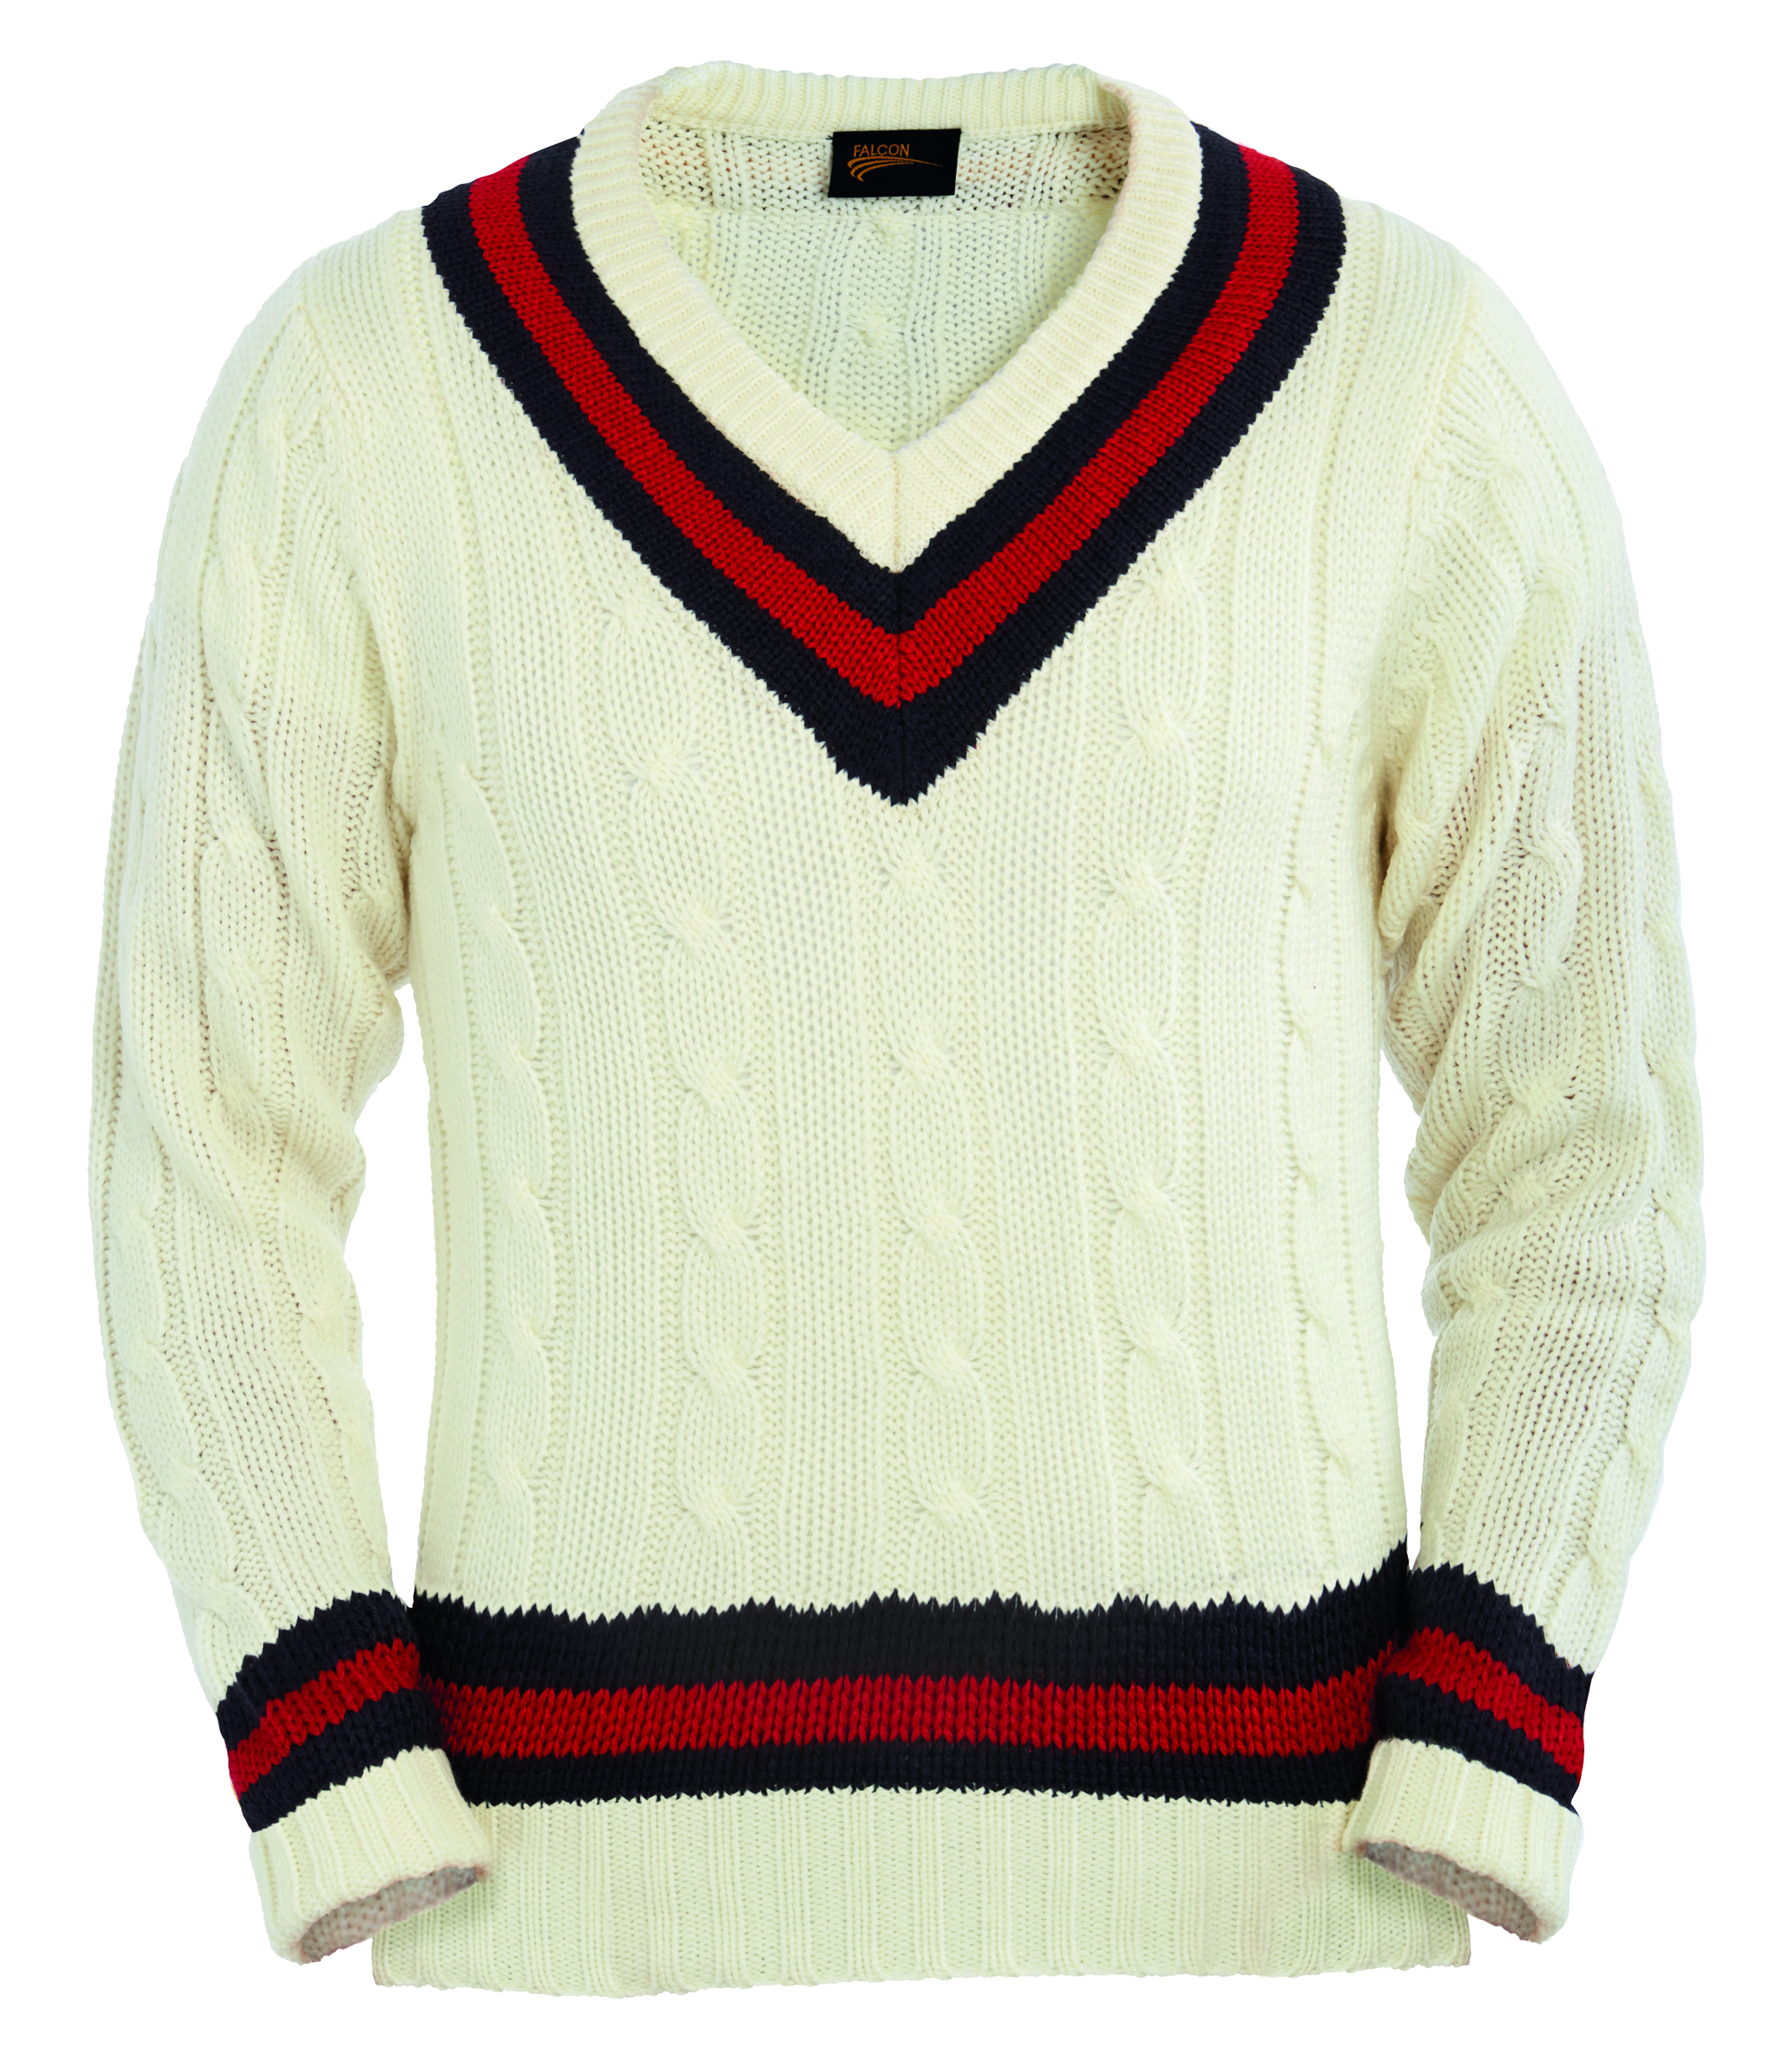 Trimmed Cricket Sweater